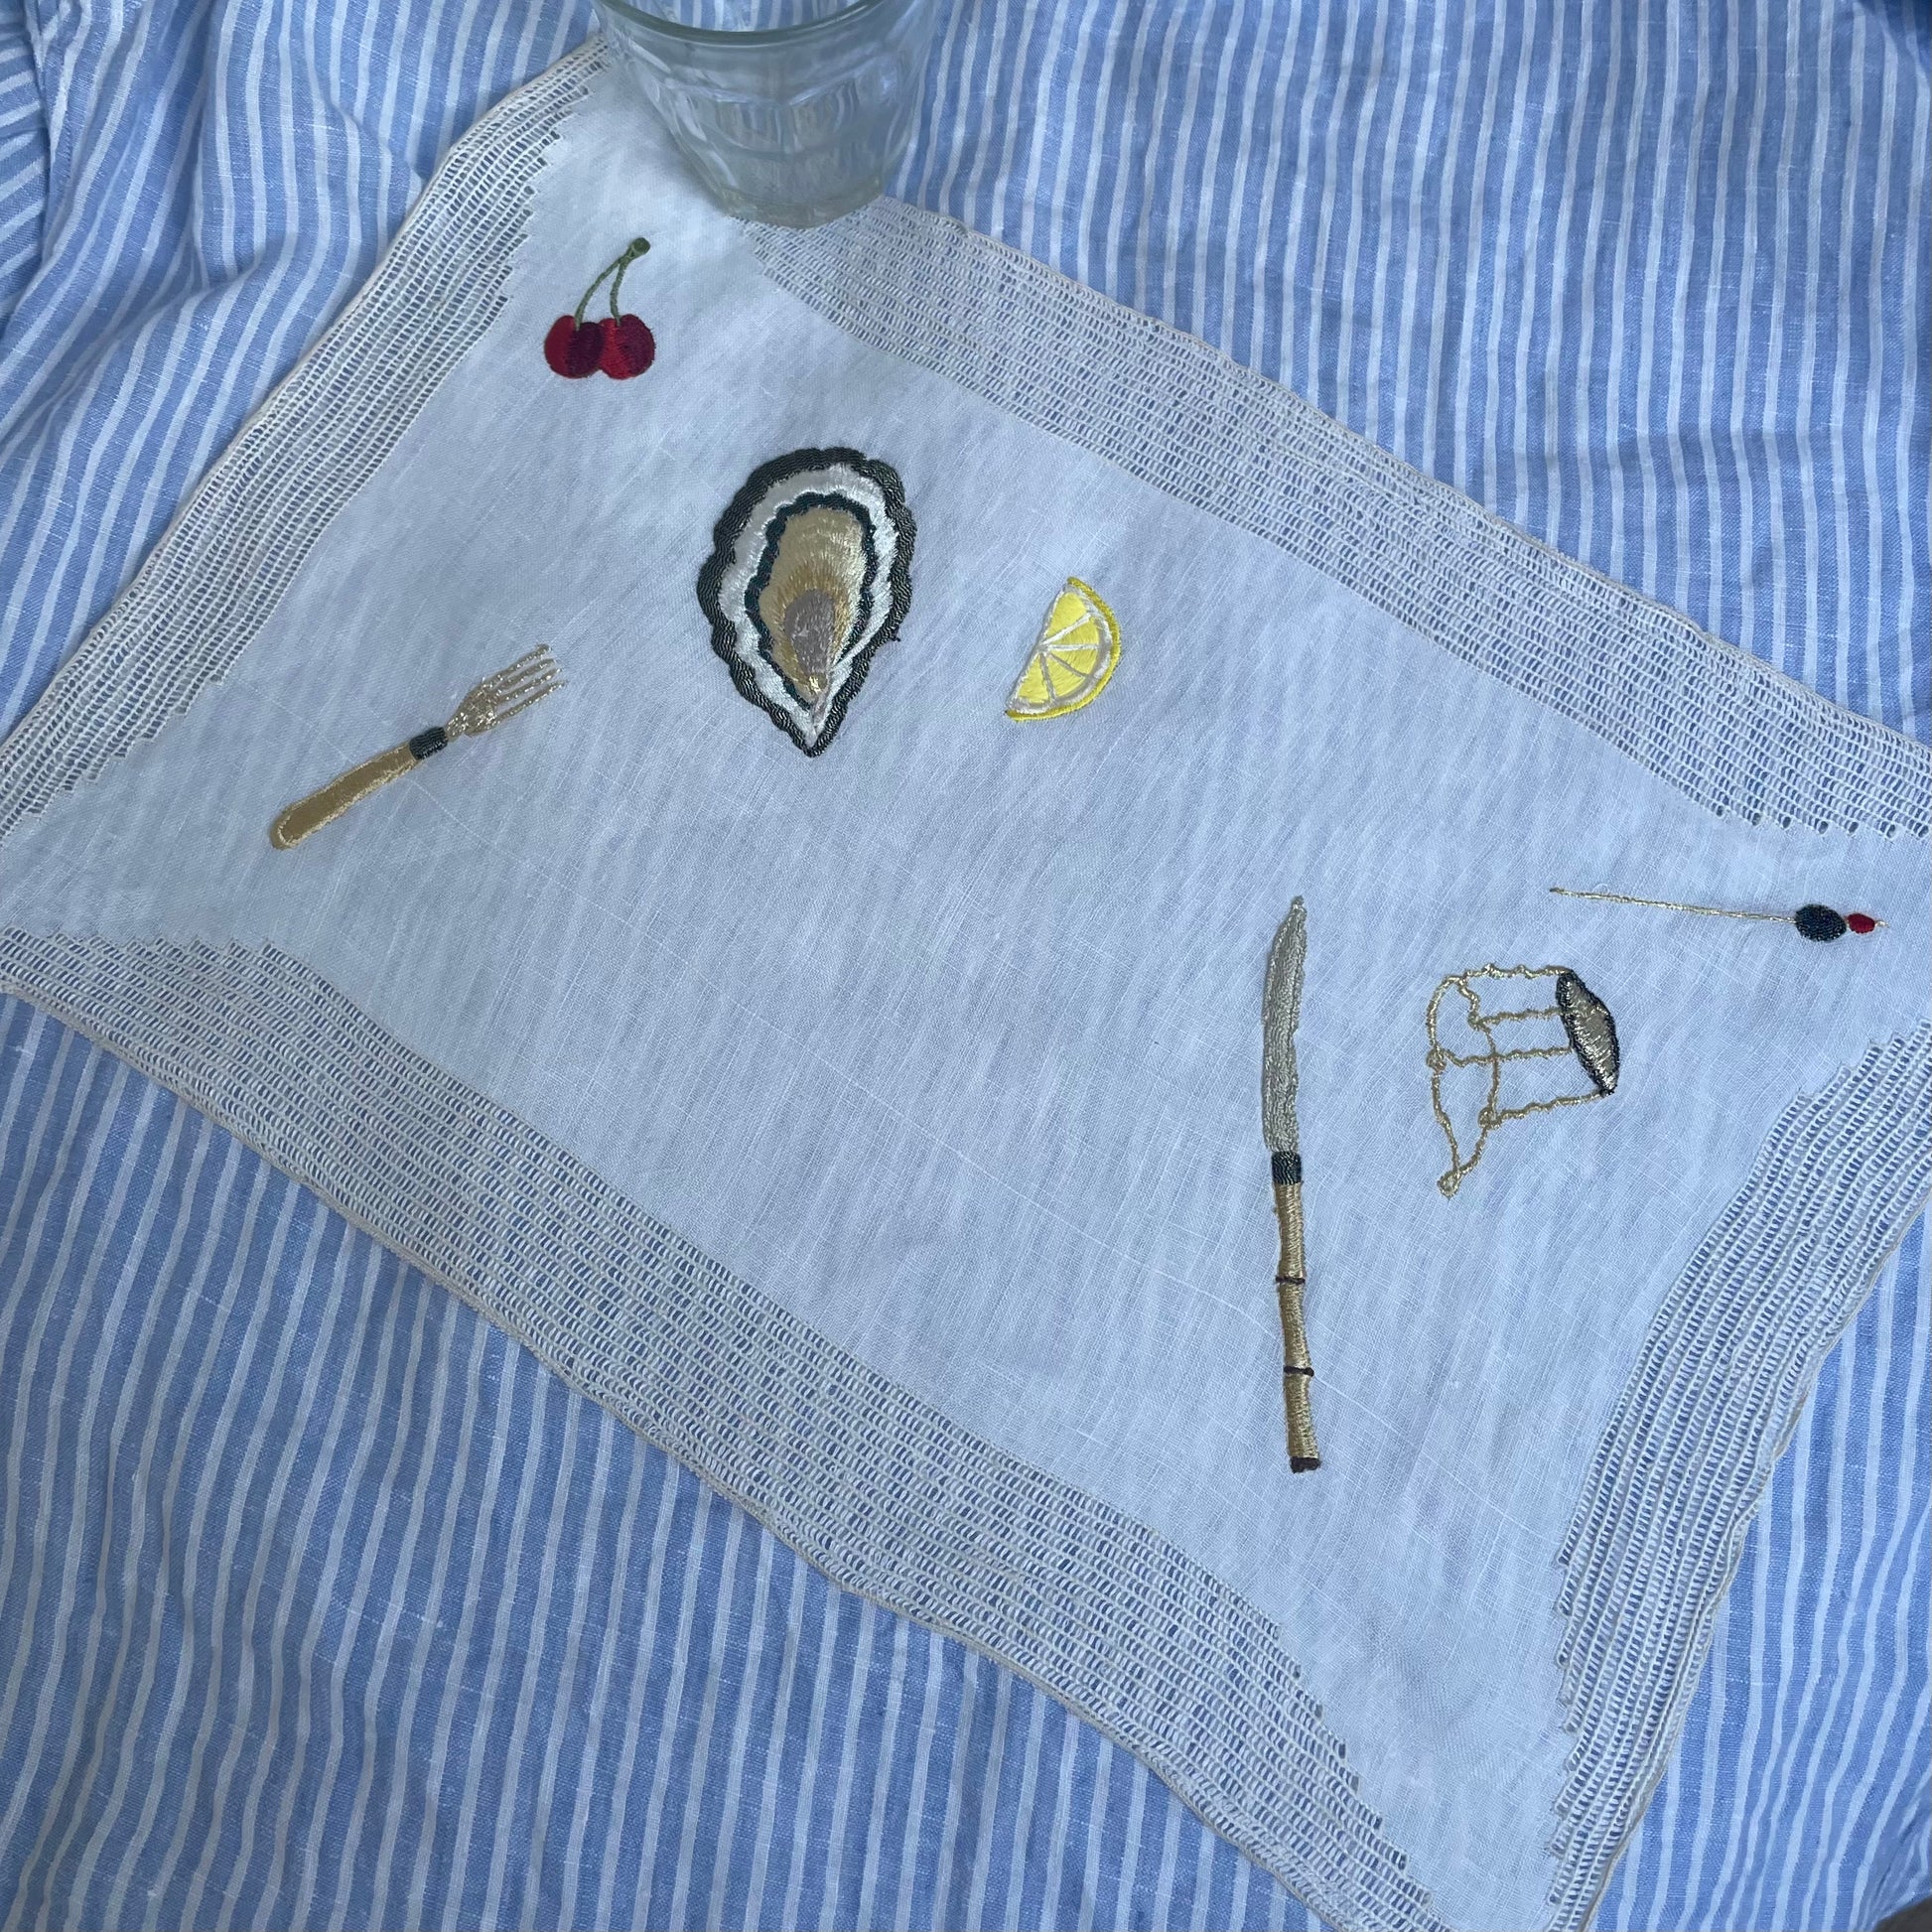 Vintage linen placemat with cherry, oyster, fork, knife, lemon wedge and champagne cork embroidery, displayed on a white and blue striped cloth with a drinking glass just visible in corner